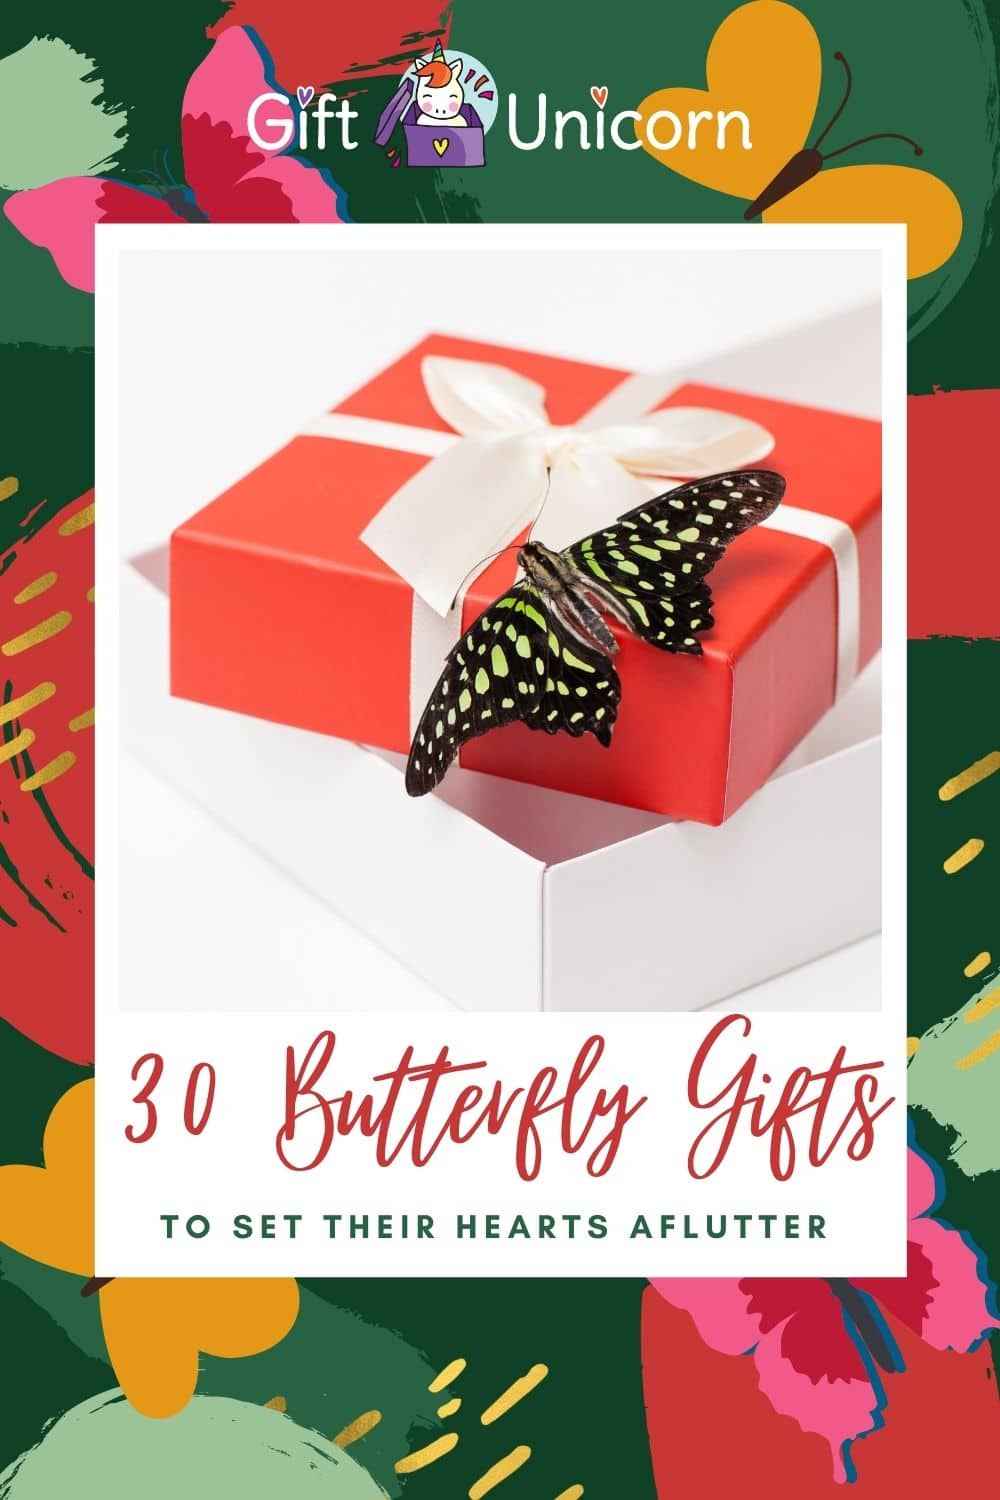 30 Butterfly Gifts to Set Their Hearts Aflutter - pinterest pin image